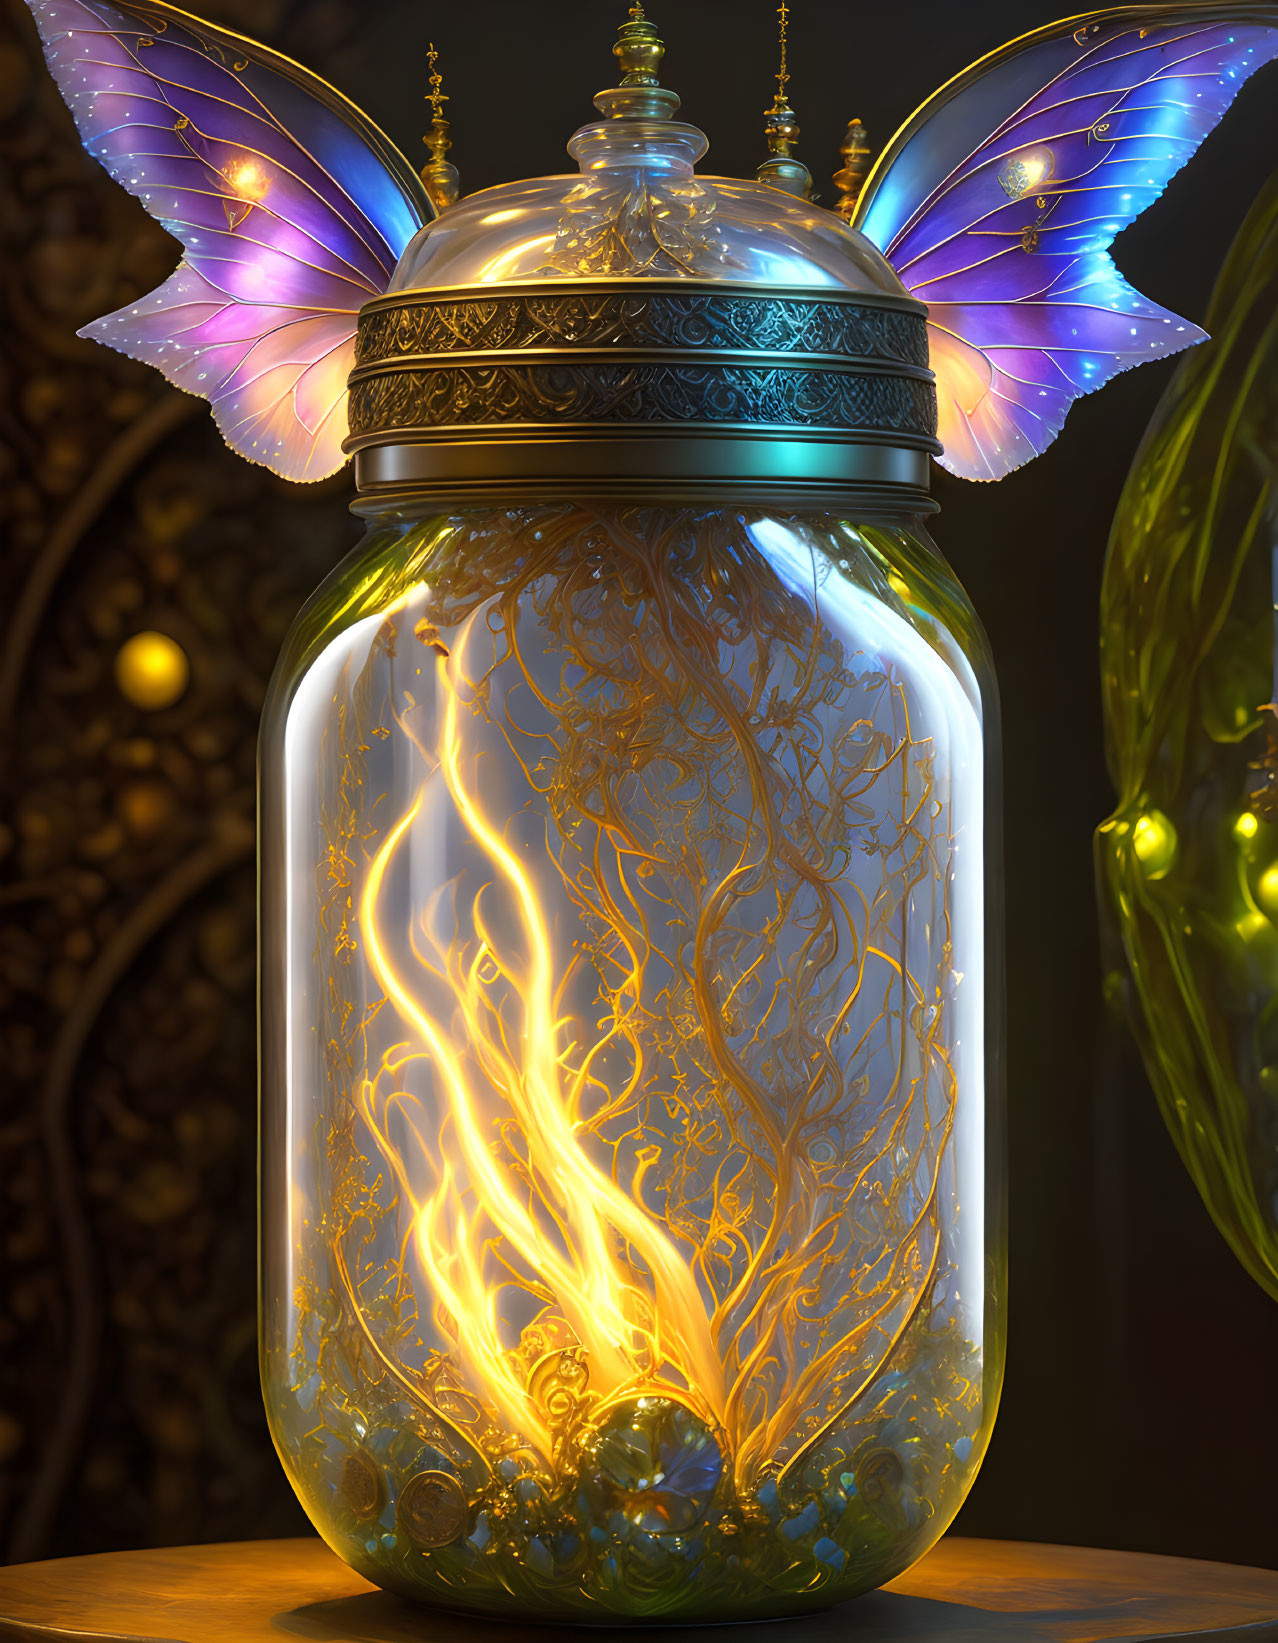 Jar without a fae